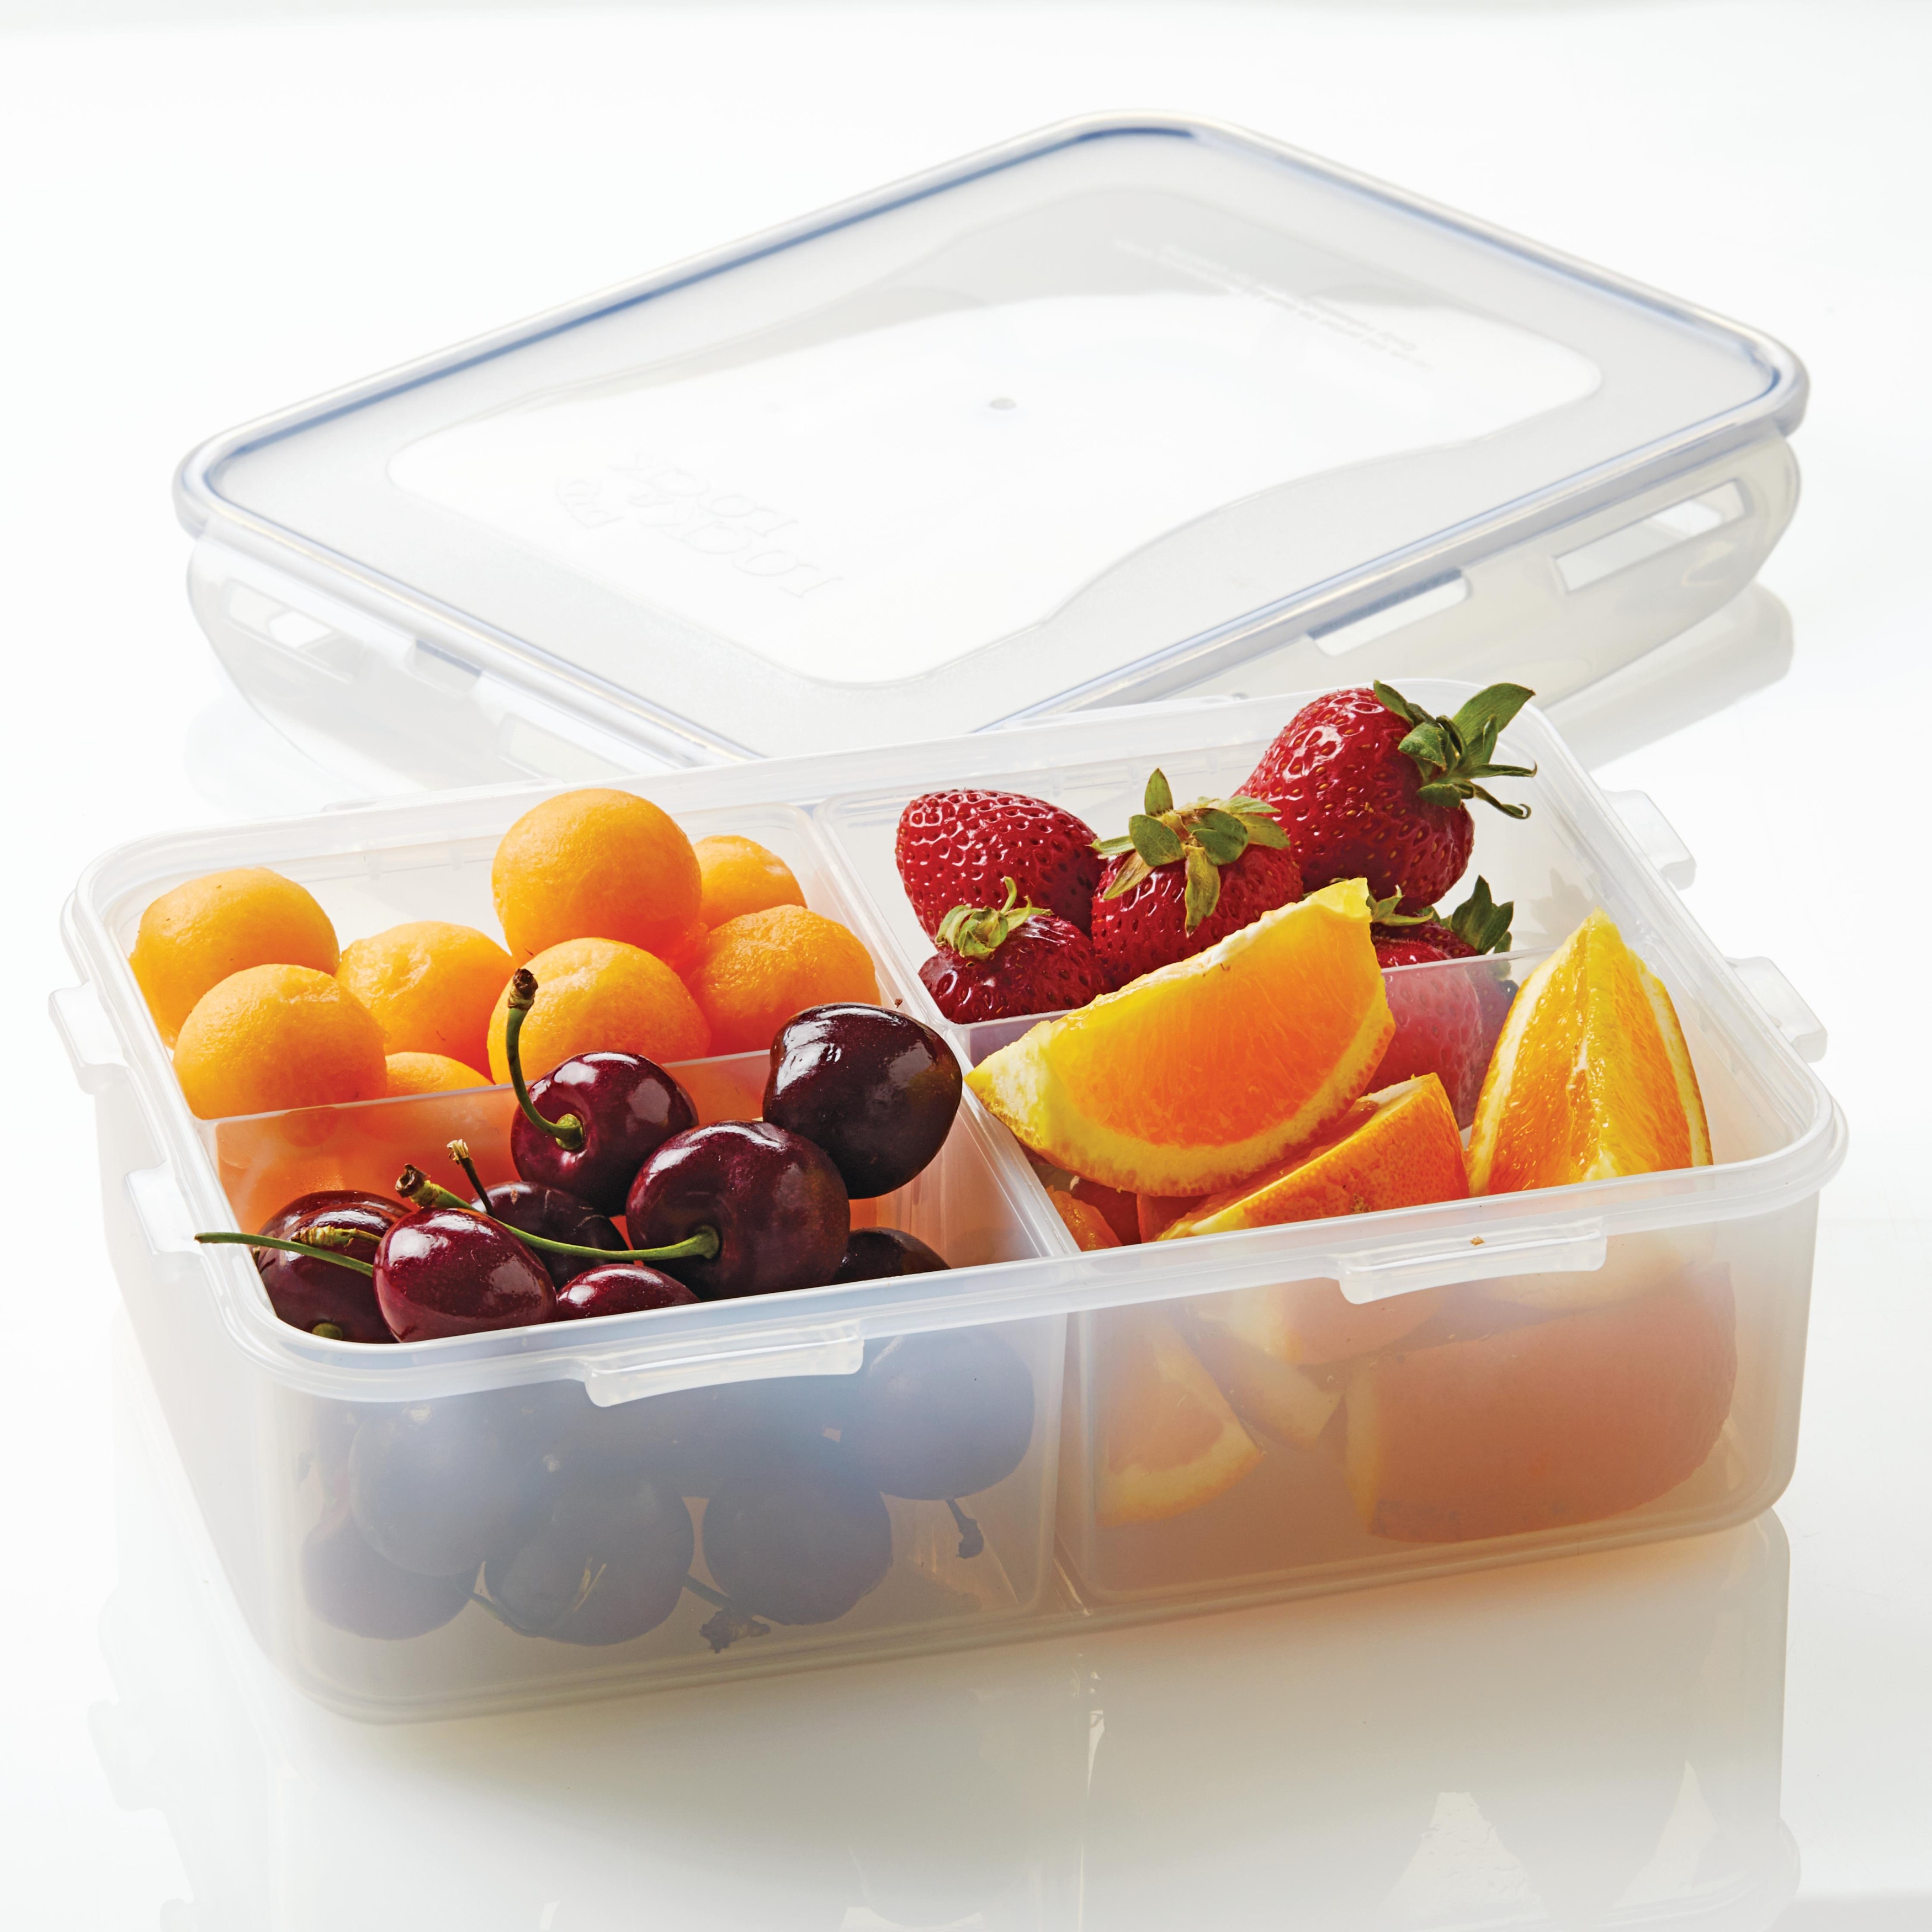 https://ak1.ostkcdn.com/images/products/is/images/direct/8ed40a26f2cadcc4249f301fb0a19b5a673d71b4/Easy-Essentials-Divided-Food-Storage-Containers-54oz-2-PC-Set.jpg